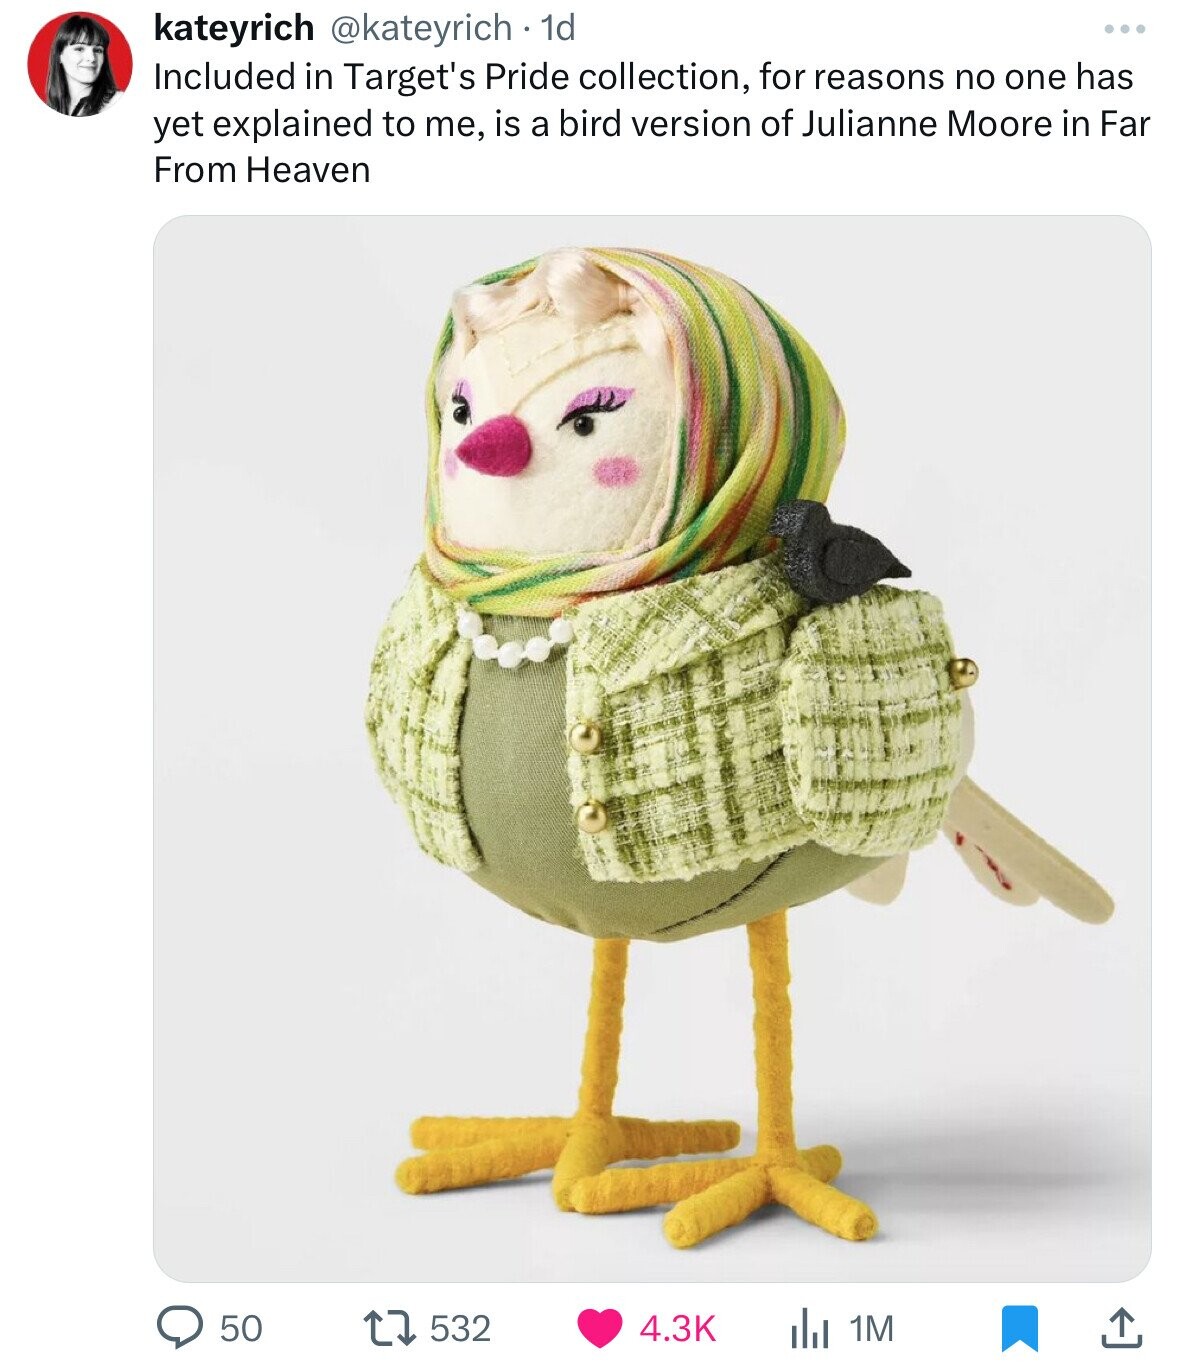 Target - kateyrich 1d . Included in Target's Pride collection, for reasons no one has yet explained to me, is a bird version of Julianne Moore in Far From Heaven 50 17532 IlI 1M